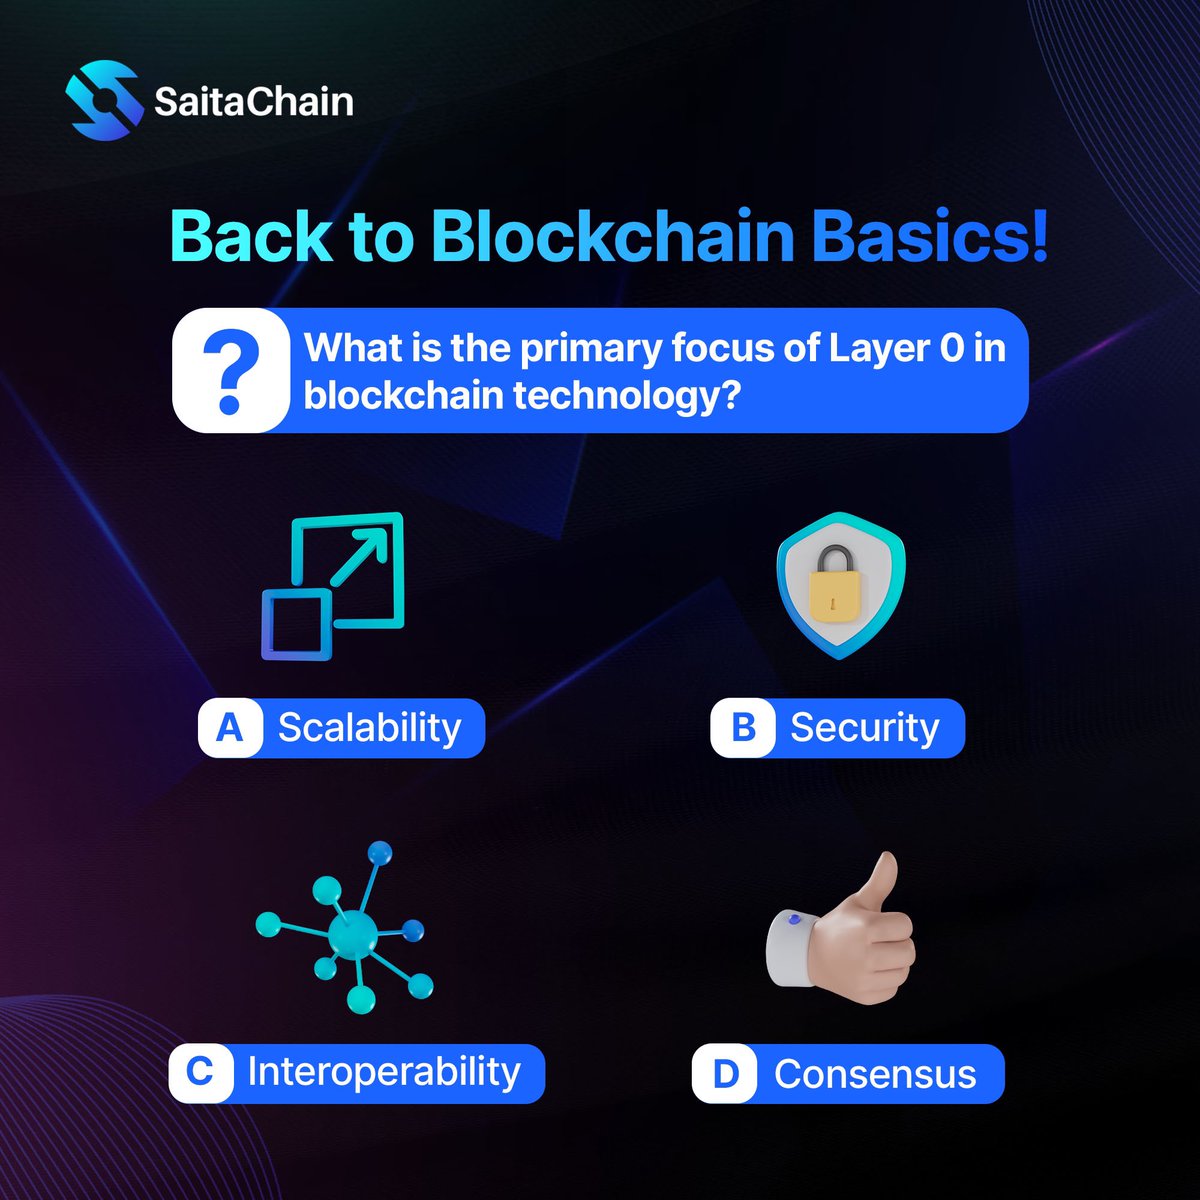 Let’s go back to the basics ⚡️ Comment the right answer below and find out if you’re really the blockchain buff you think you are! ⛓️ #SaitaChain #SaitaChainBlockchain #Blockchain #Layer0 #BlockchainInnovation